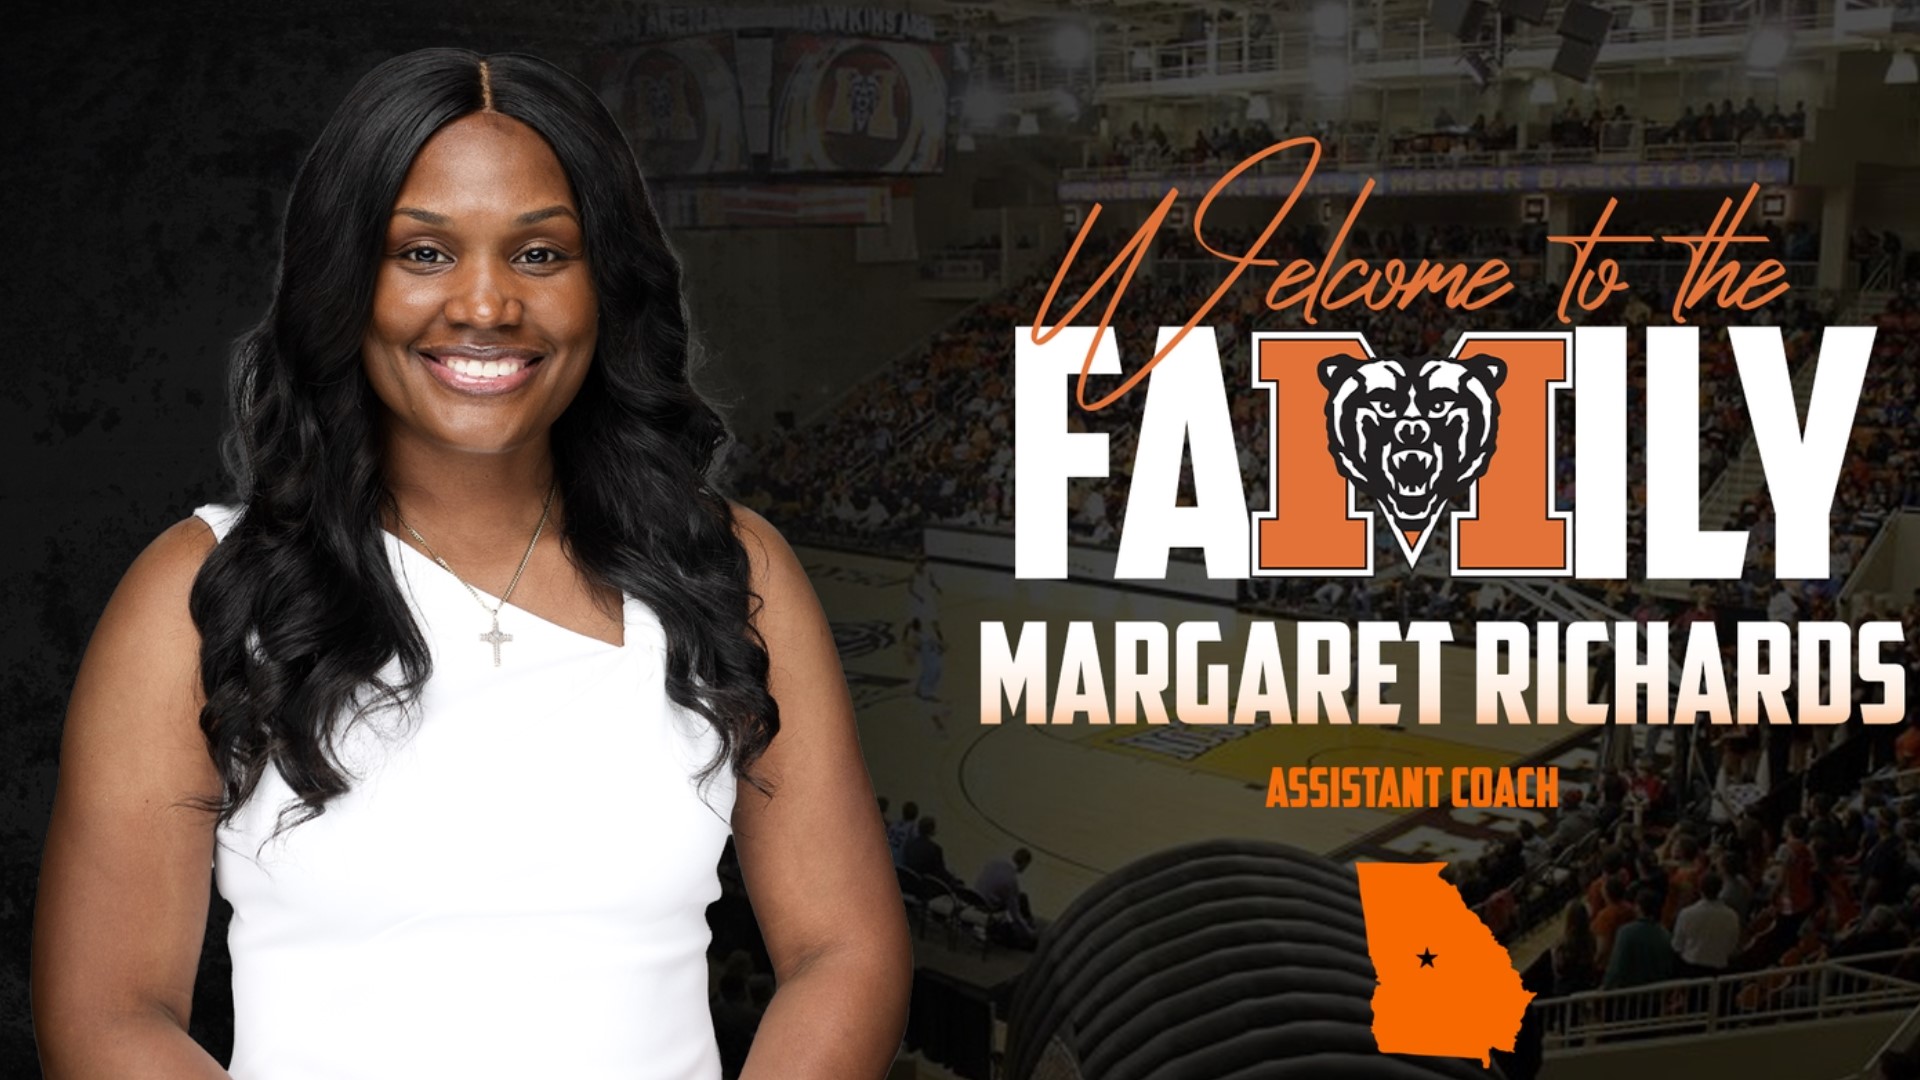 Former Alabama A&M women's head basketball coach Margaret Richards will join the staff at Mercer University.